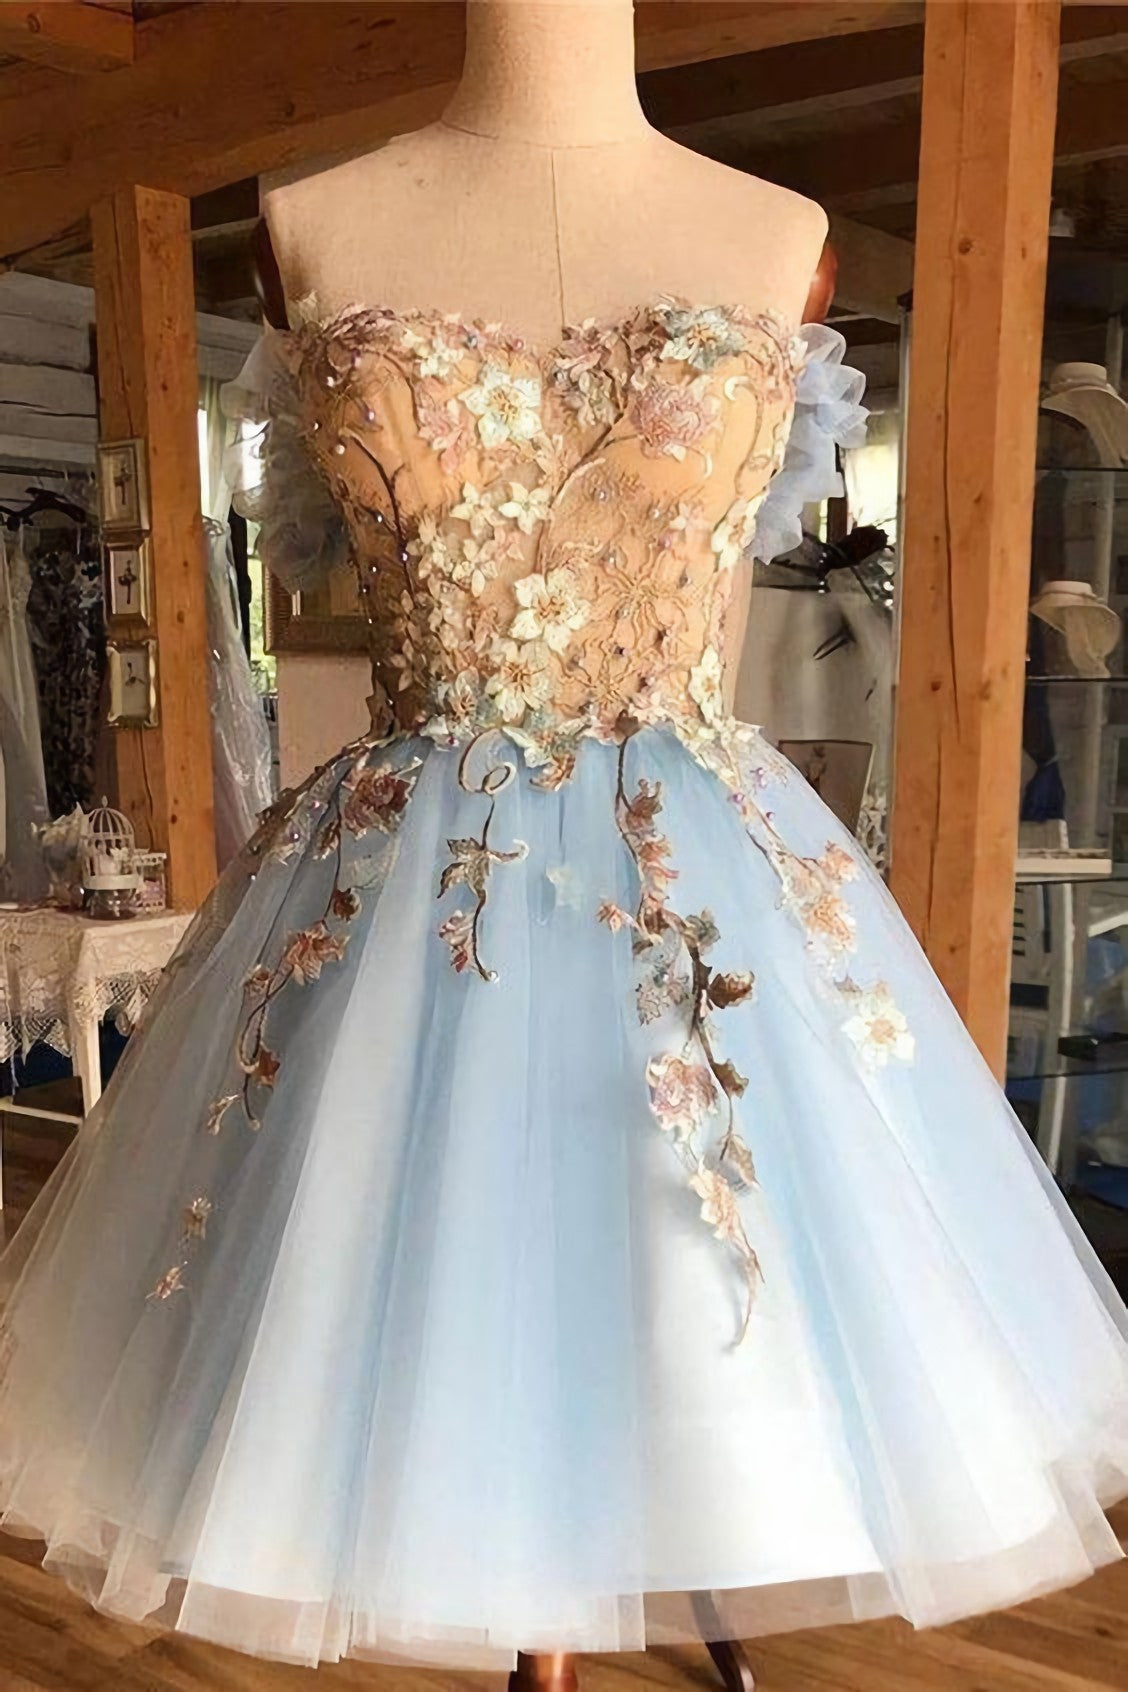 Bridesmaid Dresses Trends, A Line Light Blue Off The Shoulder Above Knee Homecoming Prom Dress, With Appliques